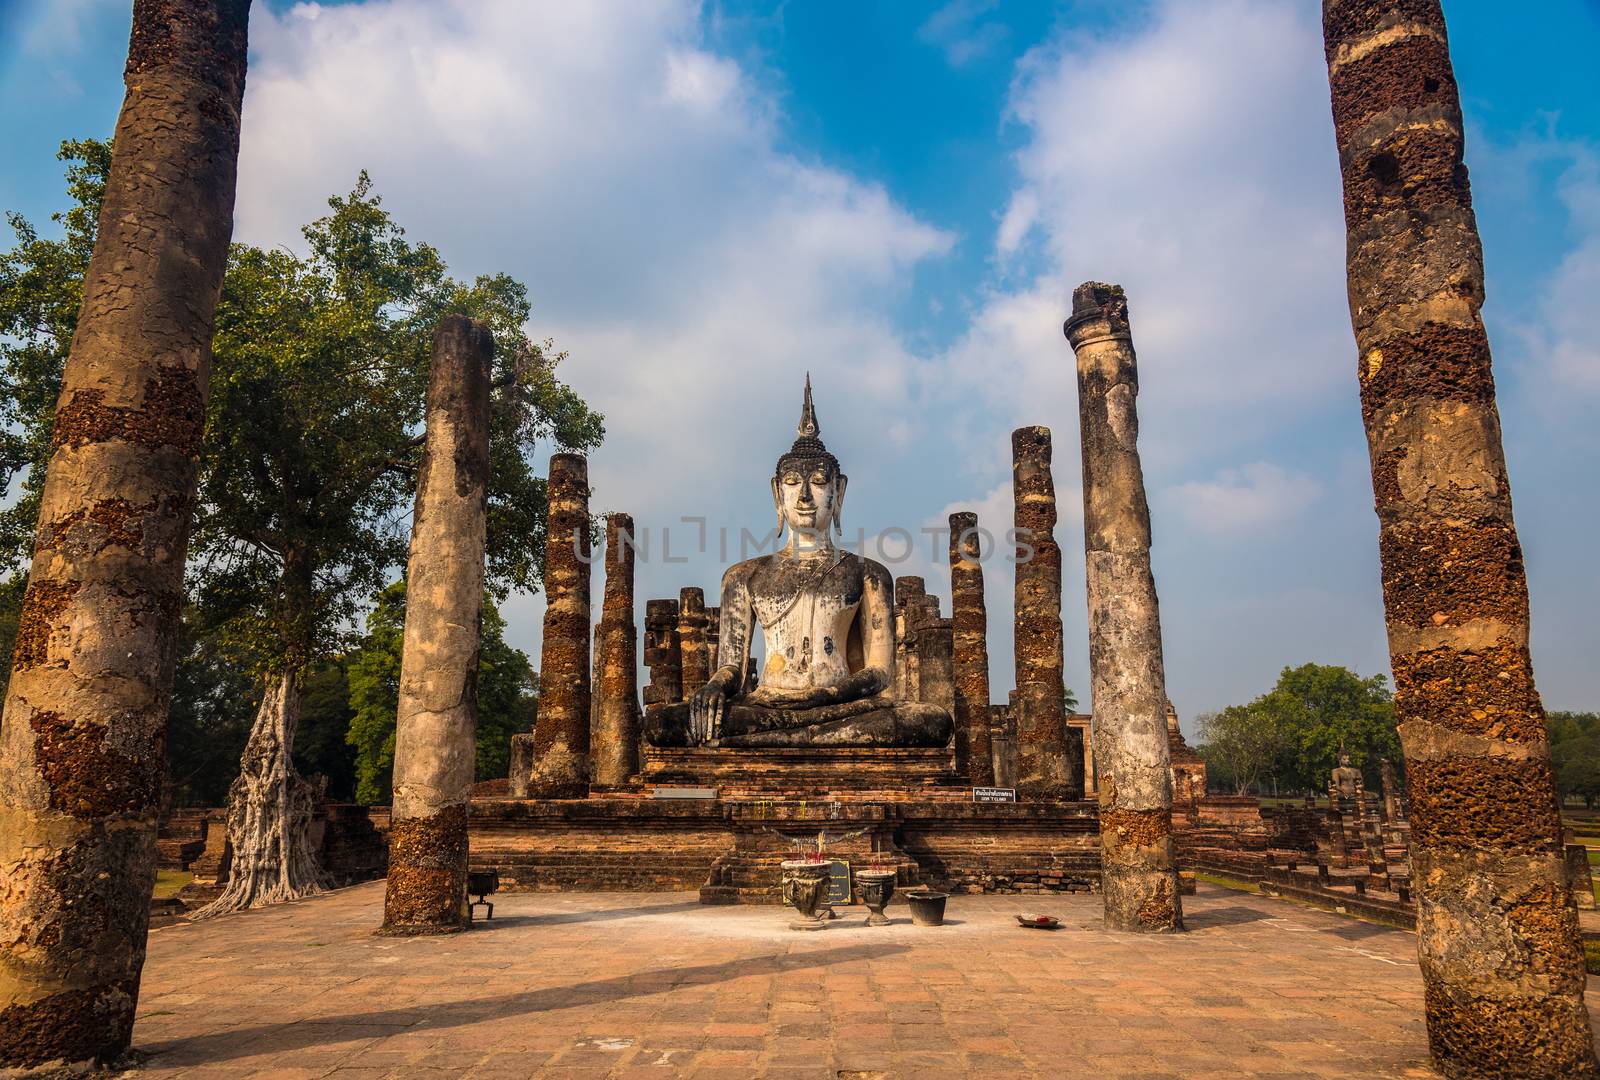 Ancient Buddha statue surrounded by the ruins of old pagoda in Wat Mahathat in Sukhothai, Thailand